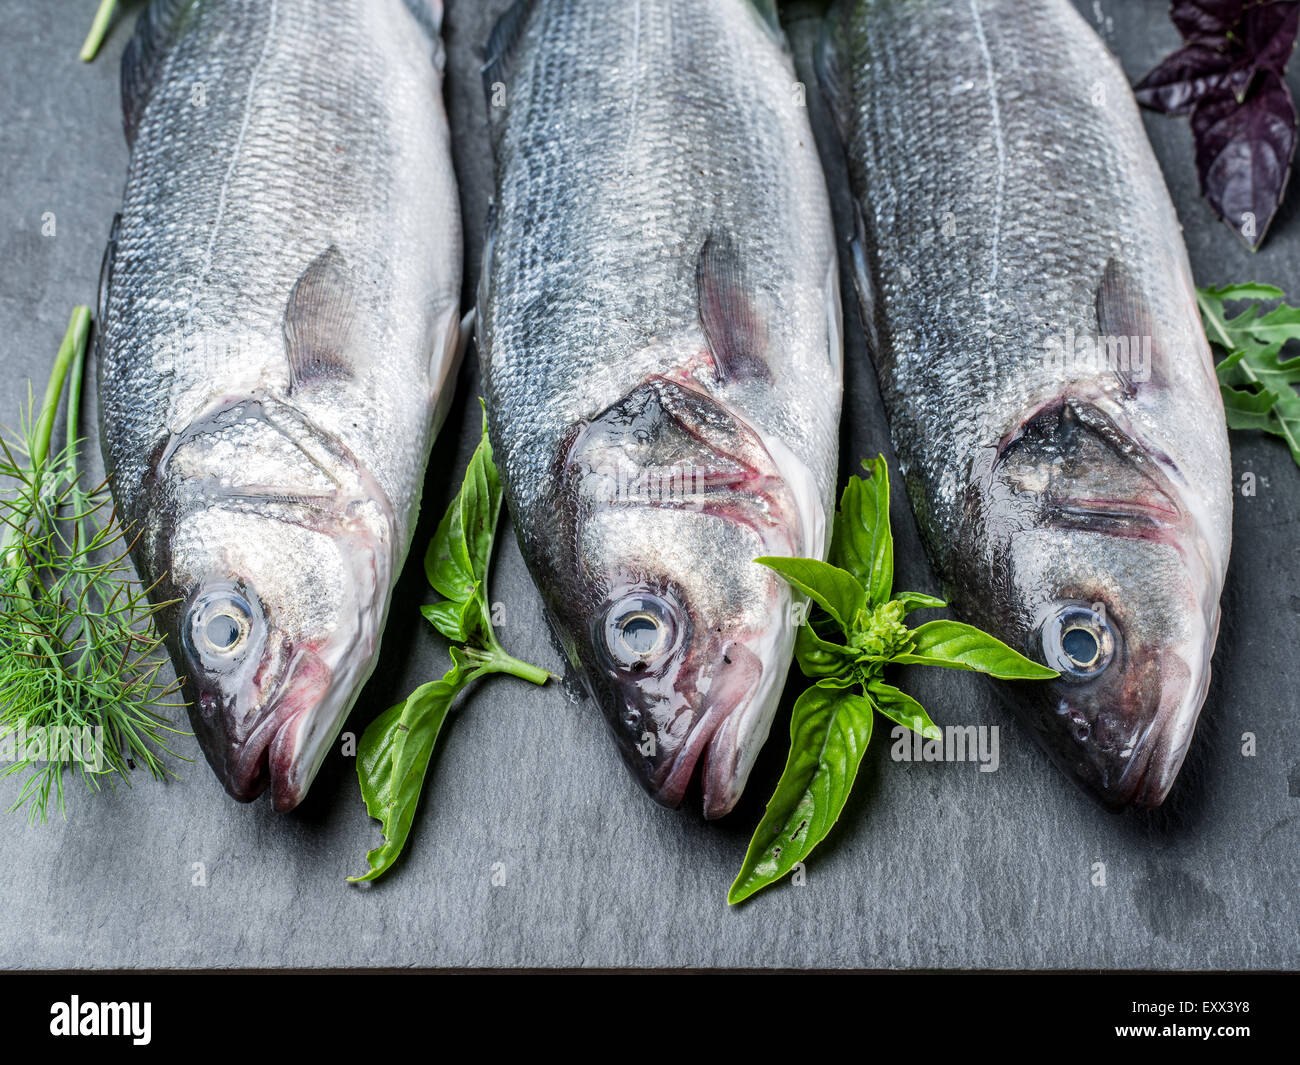 Three fish - seabass on a graphite board with spices and herbs. Stock Photo